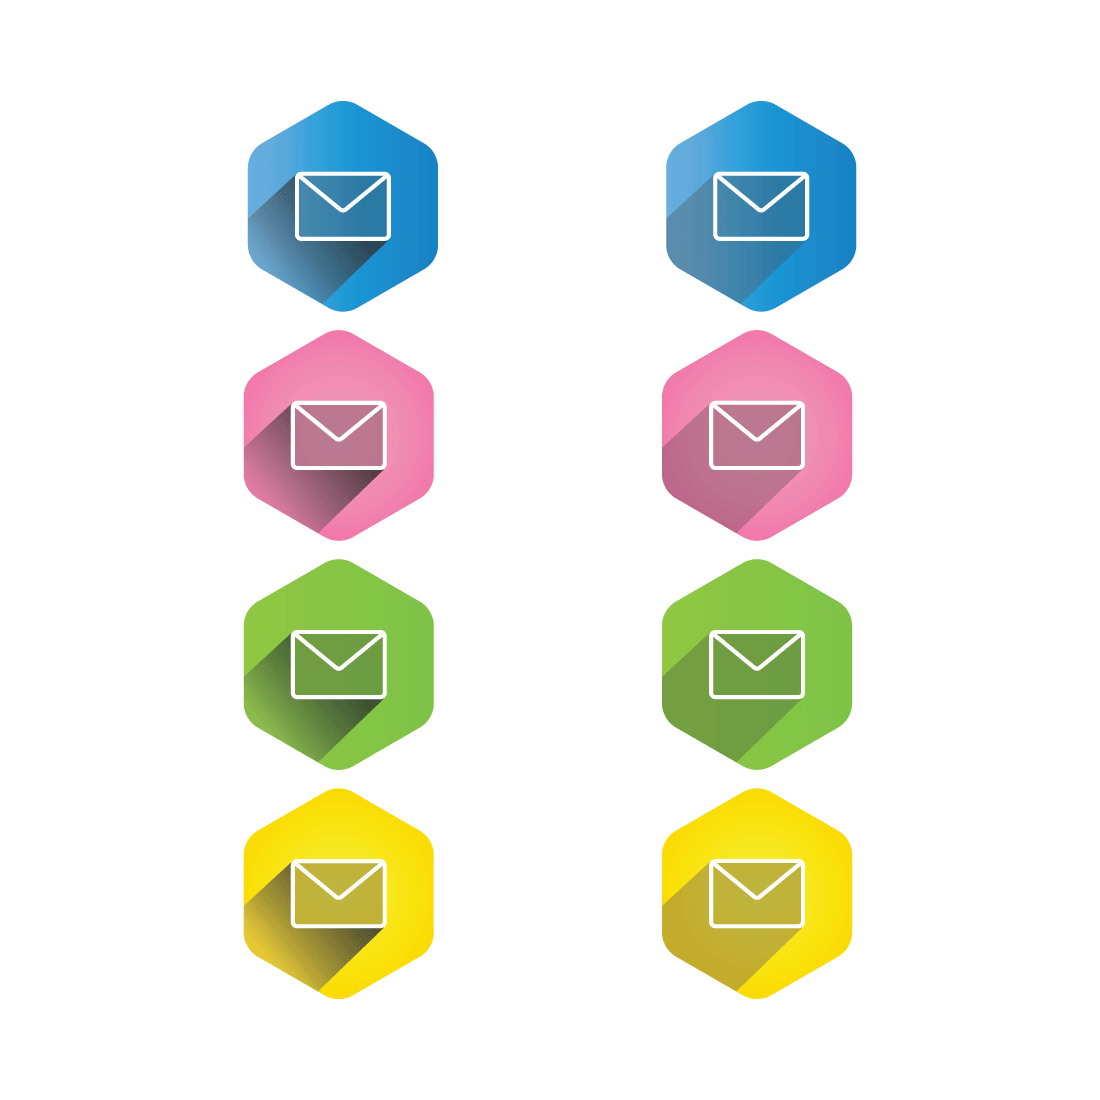 Colorful hexagon SVG contact icons 2 preview image.